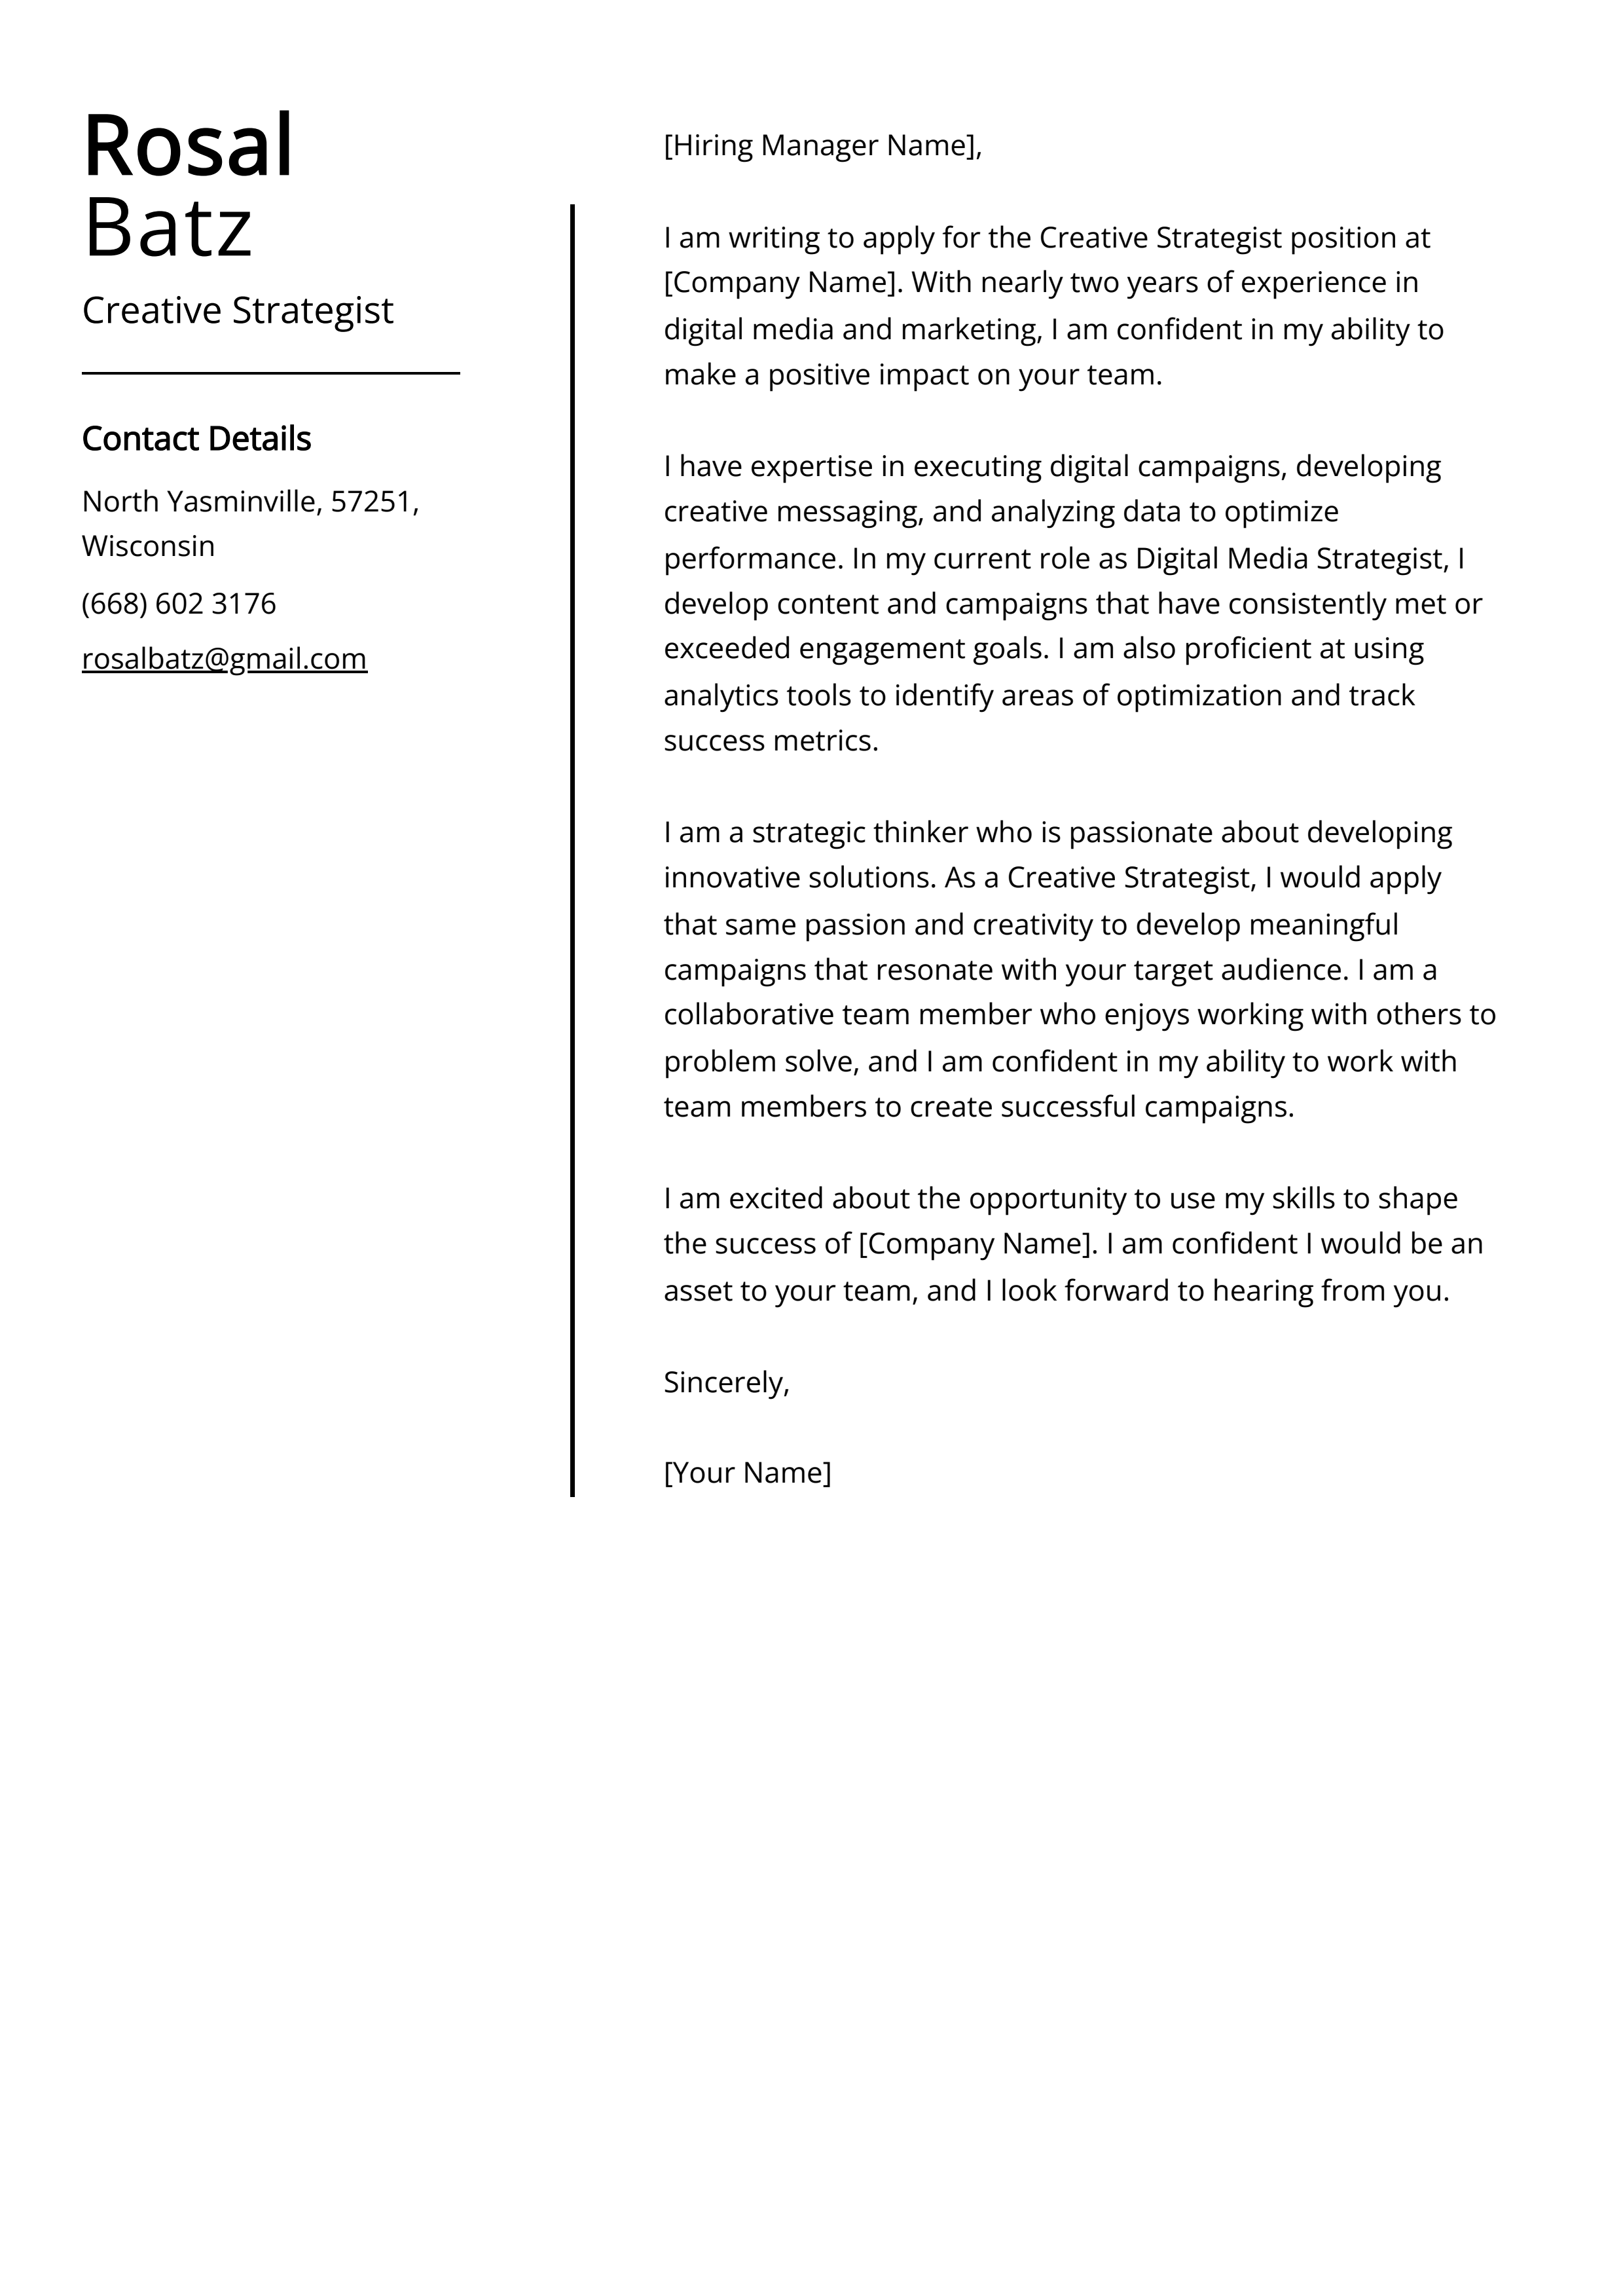 Creative Strategist Cover Letter Example